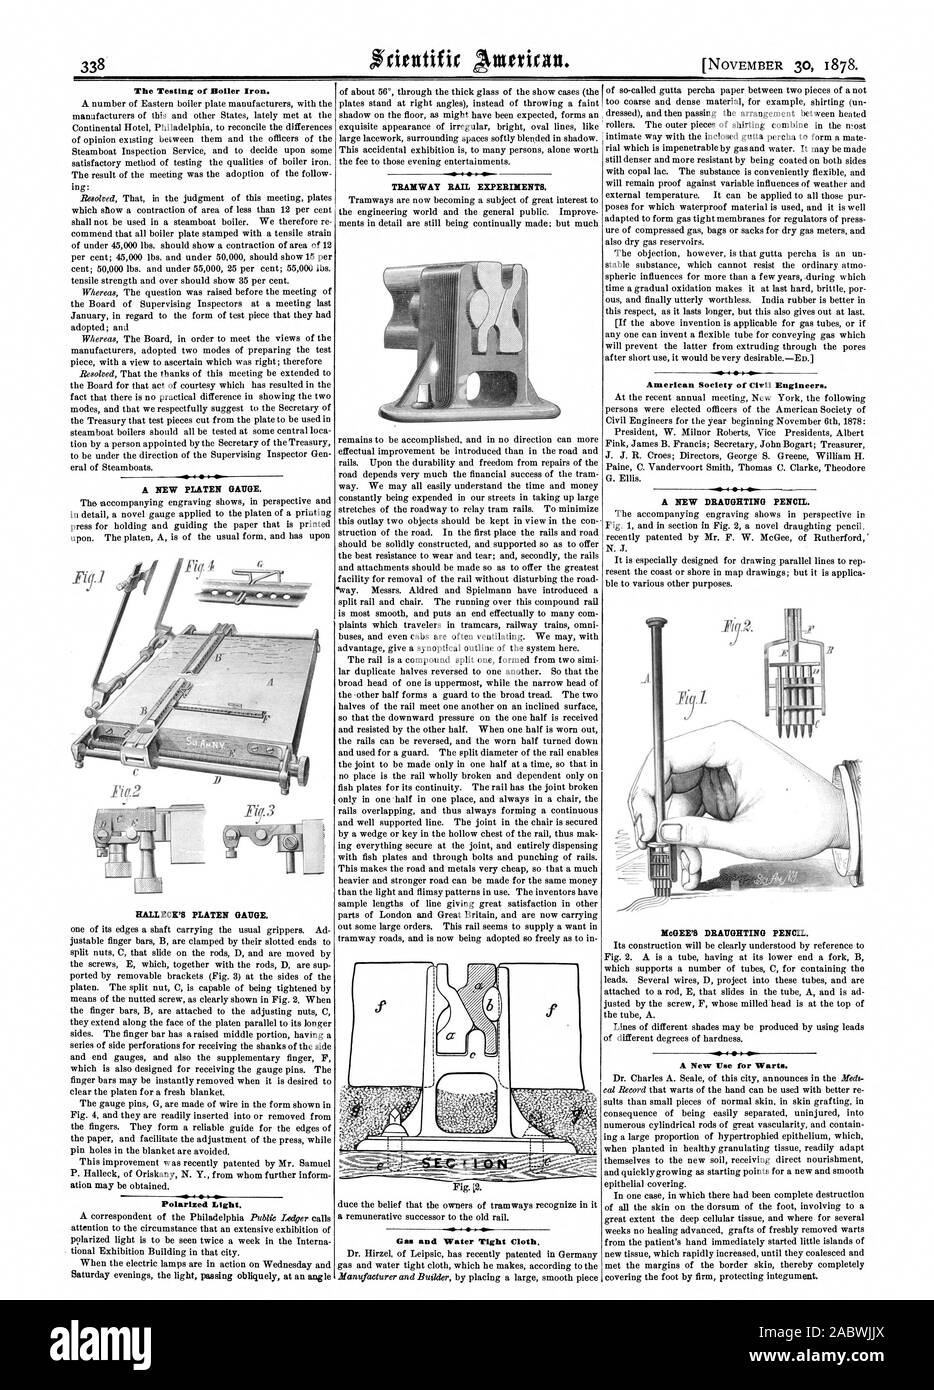 A NEW PLATEN GAUGE. HALLECR'S PLATEN GAUGE. Polarized Light. TRAMWAY RAIL EXPERIMENTS. Gas and Water Tight Cloth. American Society of Civil Engineers. A NEW DRAUGHTING PENCIL. bleGEE'S DRAUGHTING PENCIL. A New Use for Warts., scientific american, 1878-11-30 Stock Photo